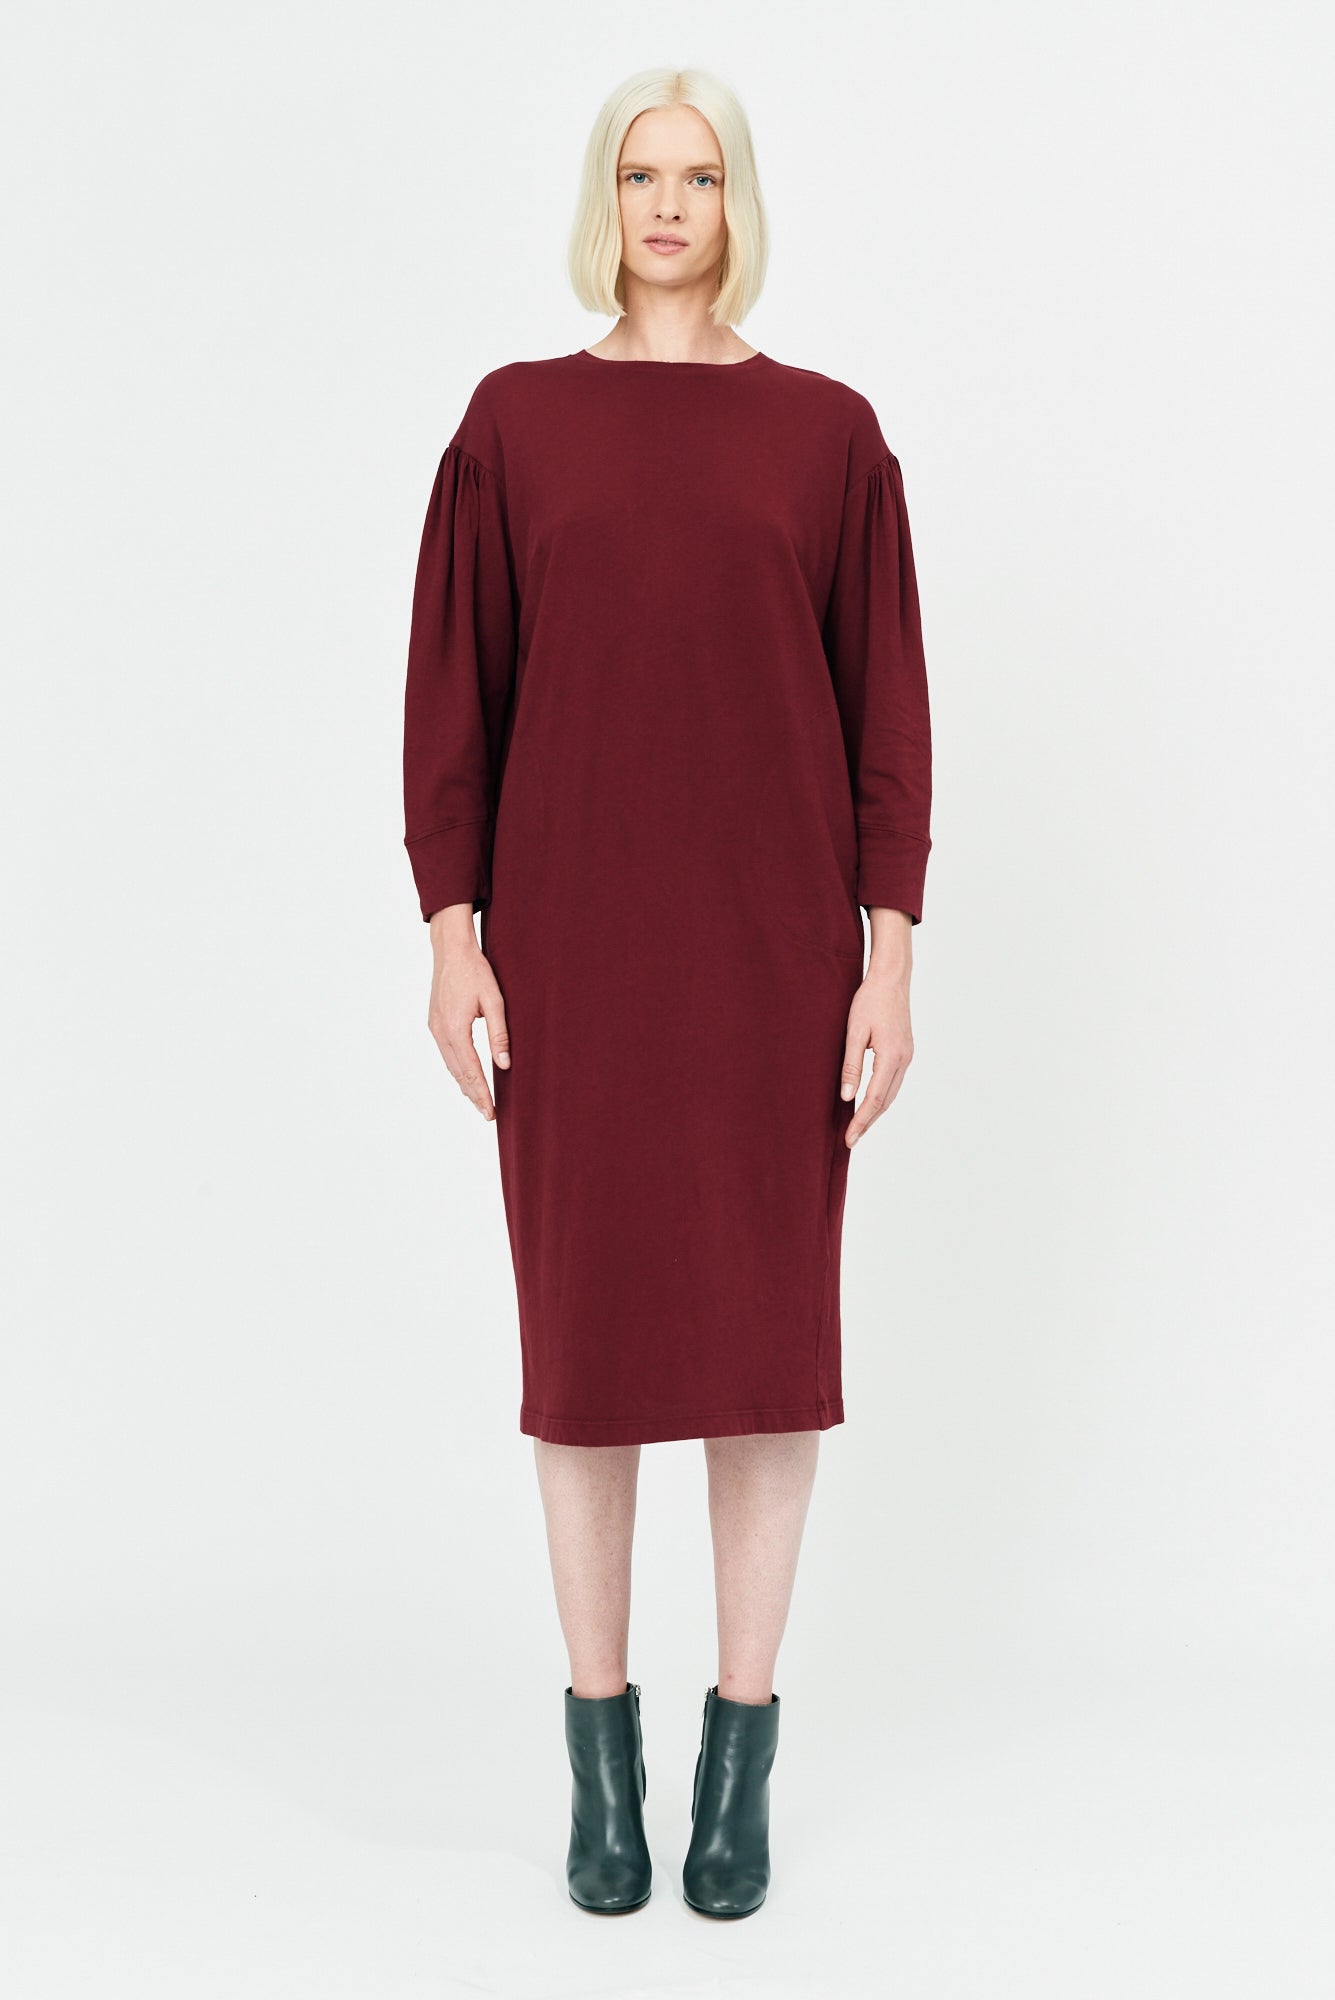 Sienna Classic Jersey Simone Sleeve Dress Full Front View